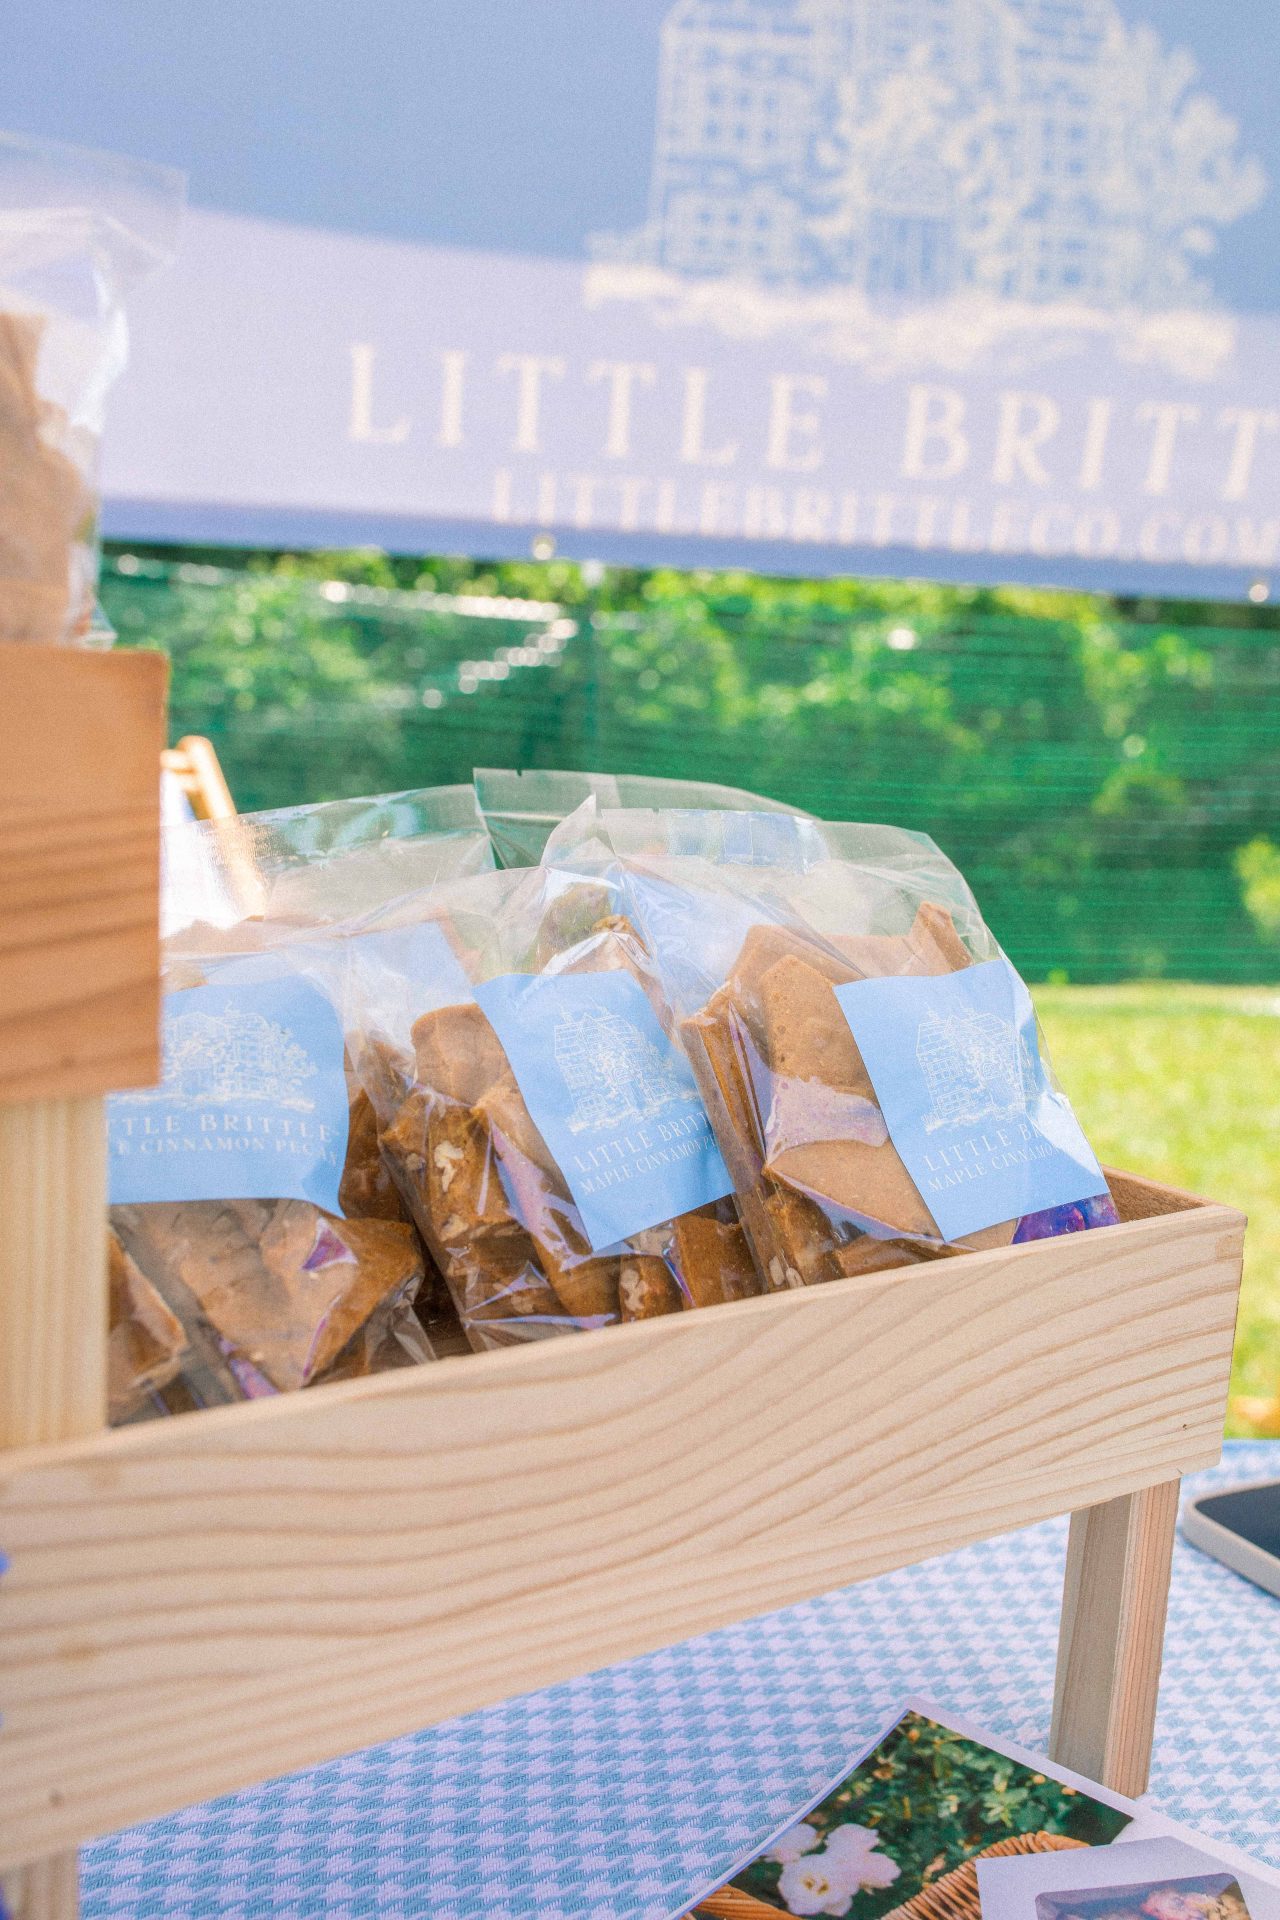 starting a business, little brittle llc, little brittle peanut brittle, little brittle, taralynn, owner of little brittle, moms starting businesses, how to start a business, my first farmers market, farmers market fort mill South Carolina, working, bakery, peanut brittle company, brittle company, the best brittle ever, maple cinnamon pecan brittle, marketing, business branding, cottage, business aesthetic, South Carolina business, South Carolina farmers market, town of fort mill, fort mill south Carolina, sourdough cinnamon rolls, commercial kitchen, best brittle in South Carolina, starting a business as a mom 